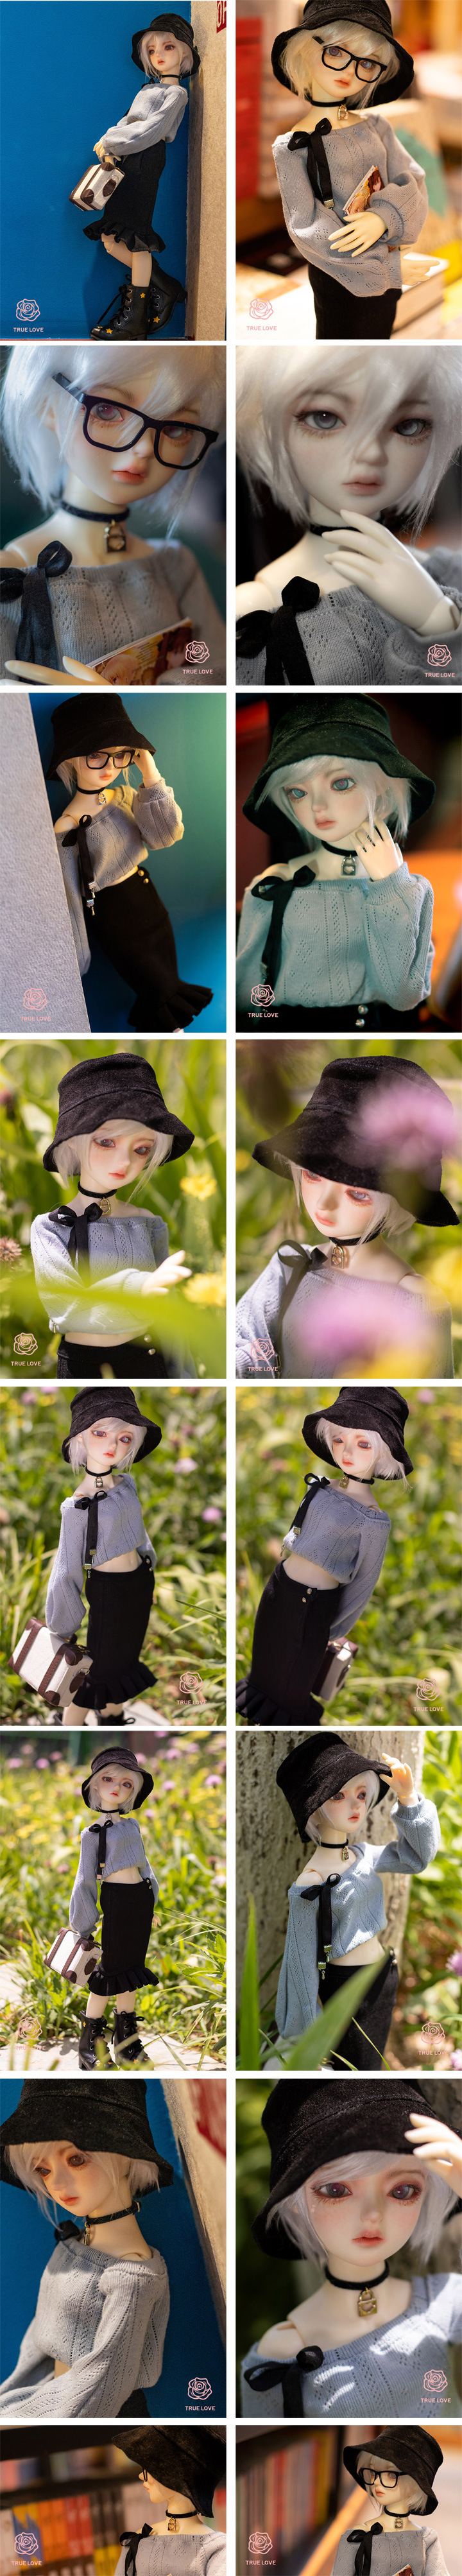 BJD Xiaomo Girl Ball Jointed Doll